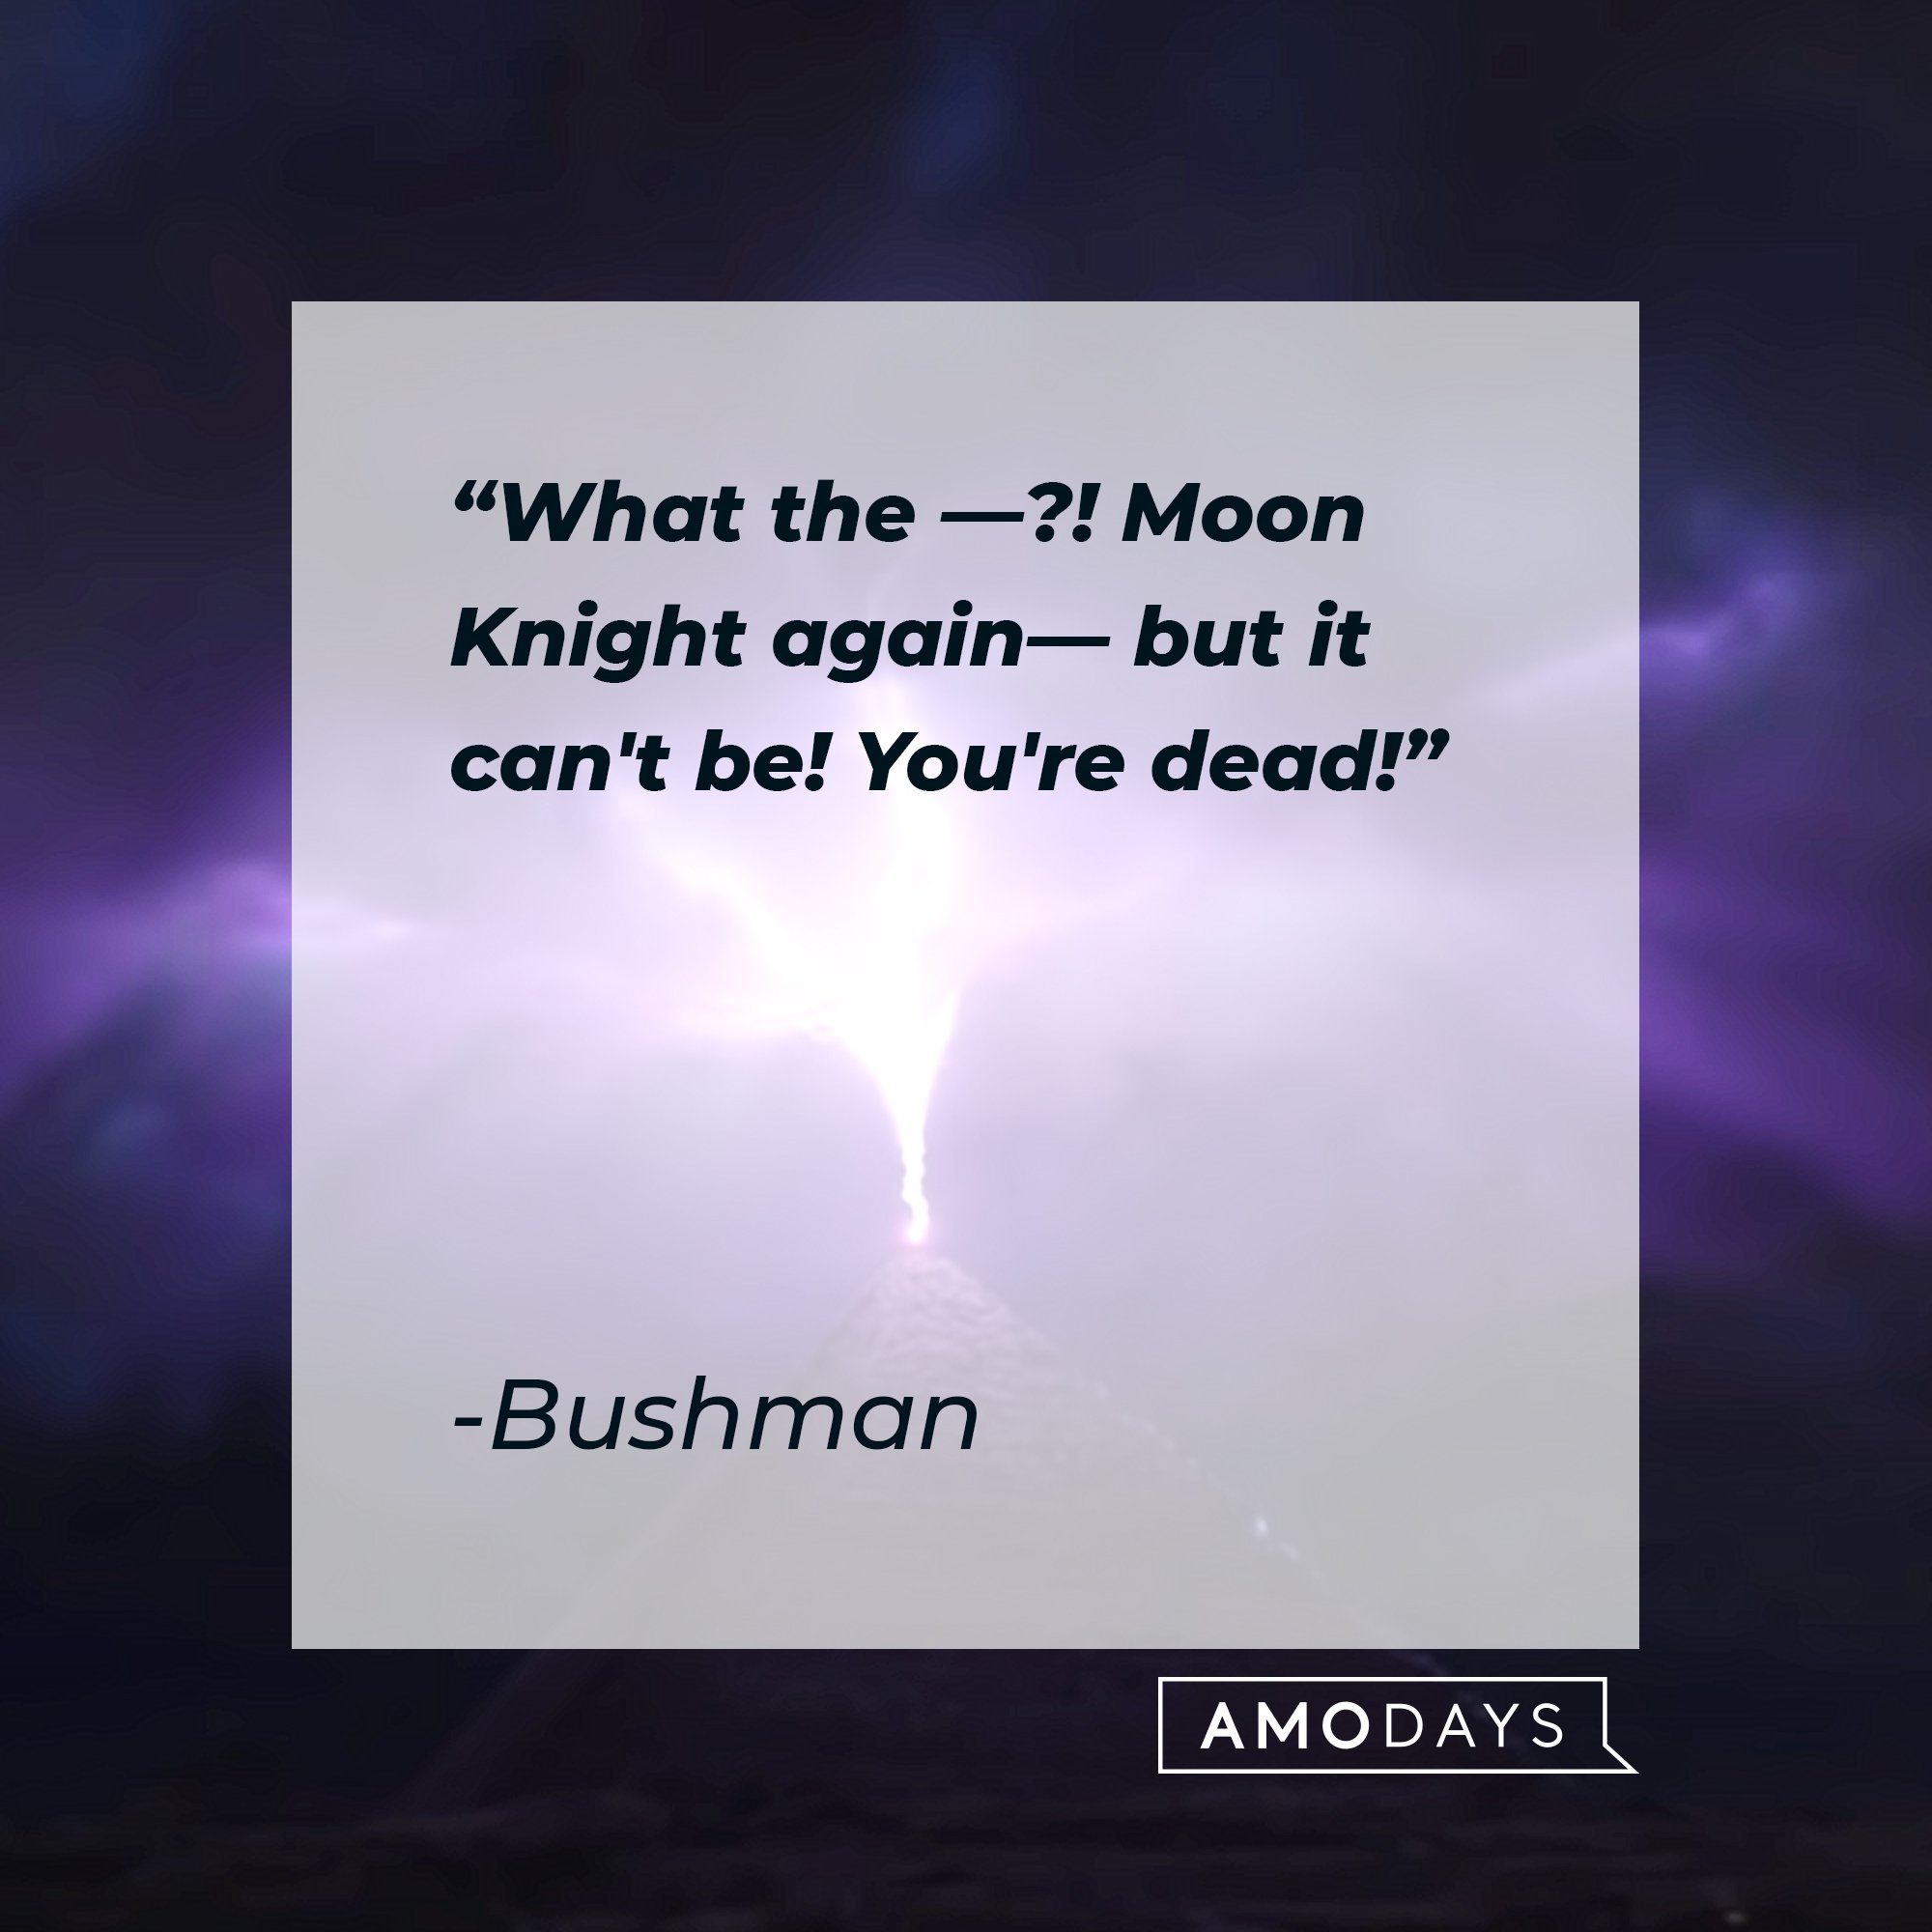 Bushman’s quote: "What the —?! Moon Knight again— but it can't be! You're dead!" | Image: AmoDays